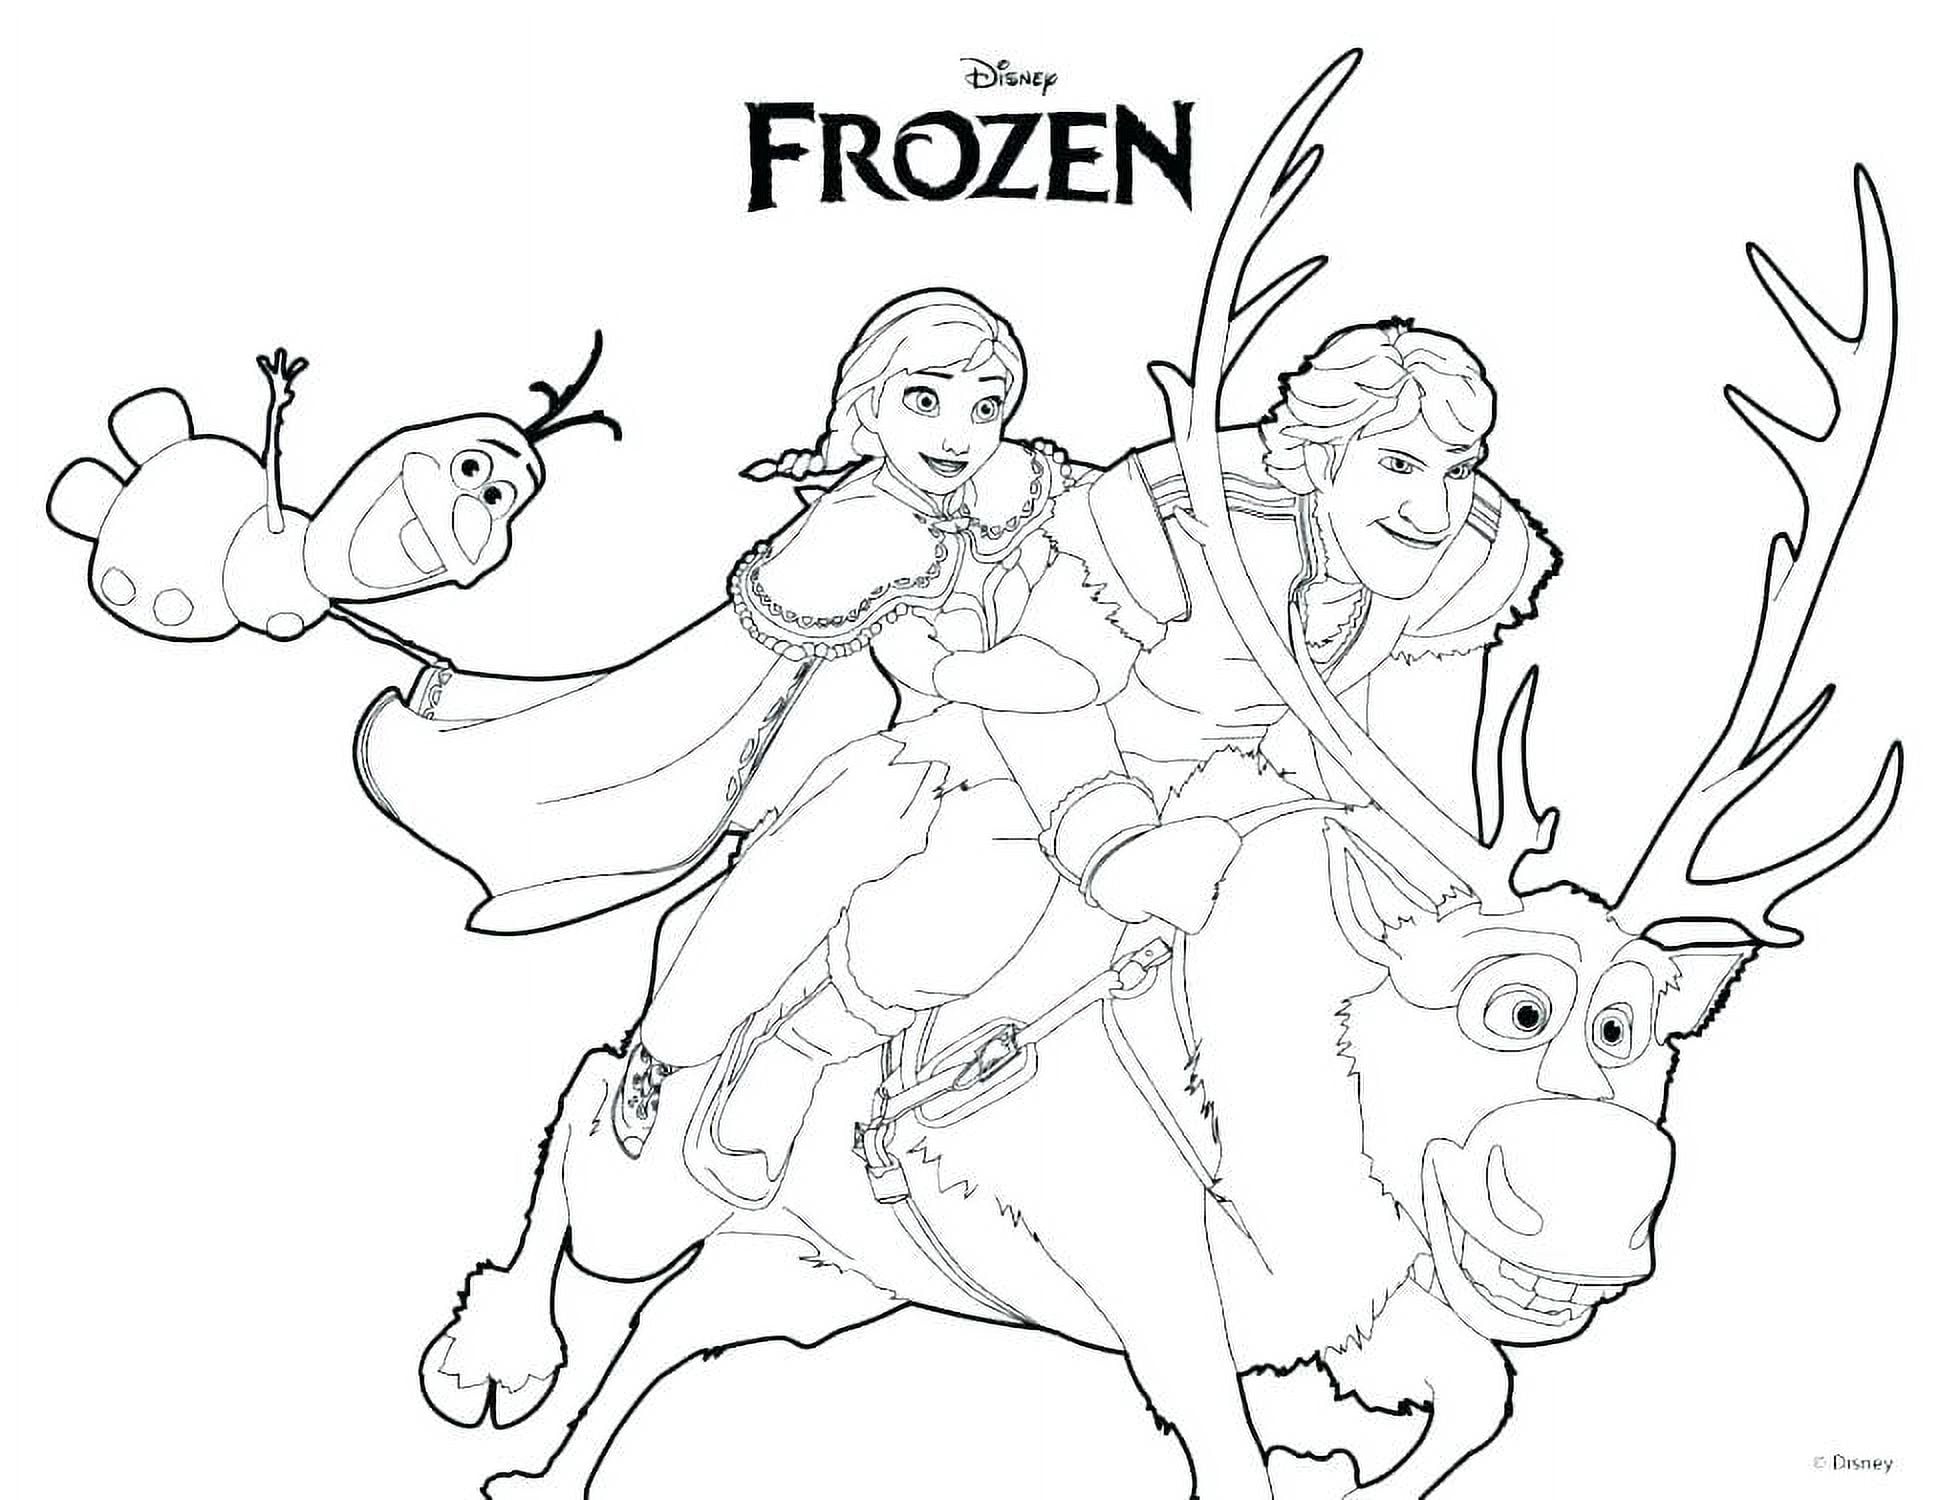 Crayola giant coloring pages featuring disneys frozen pages